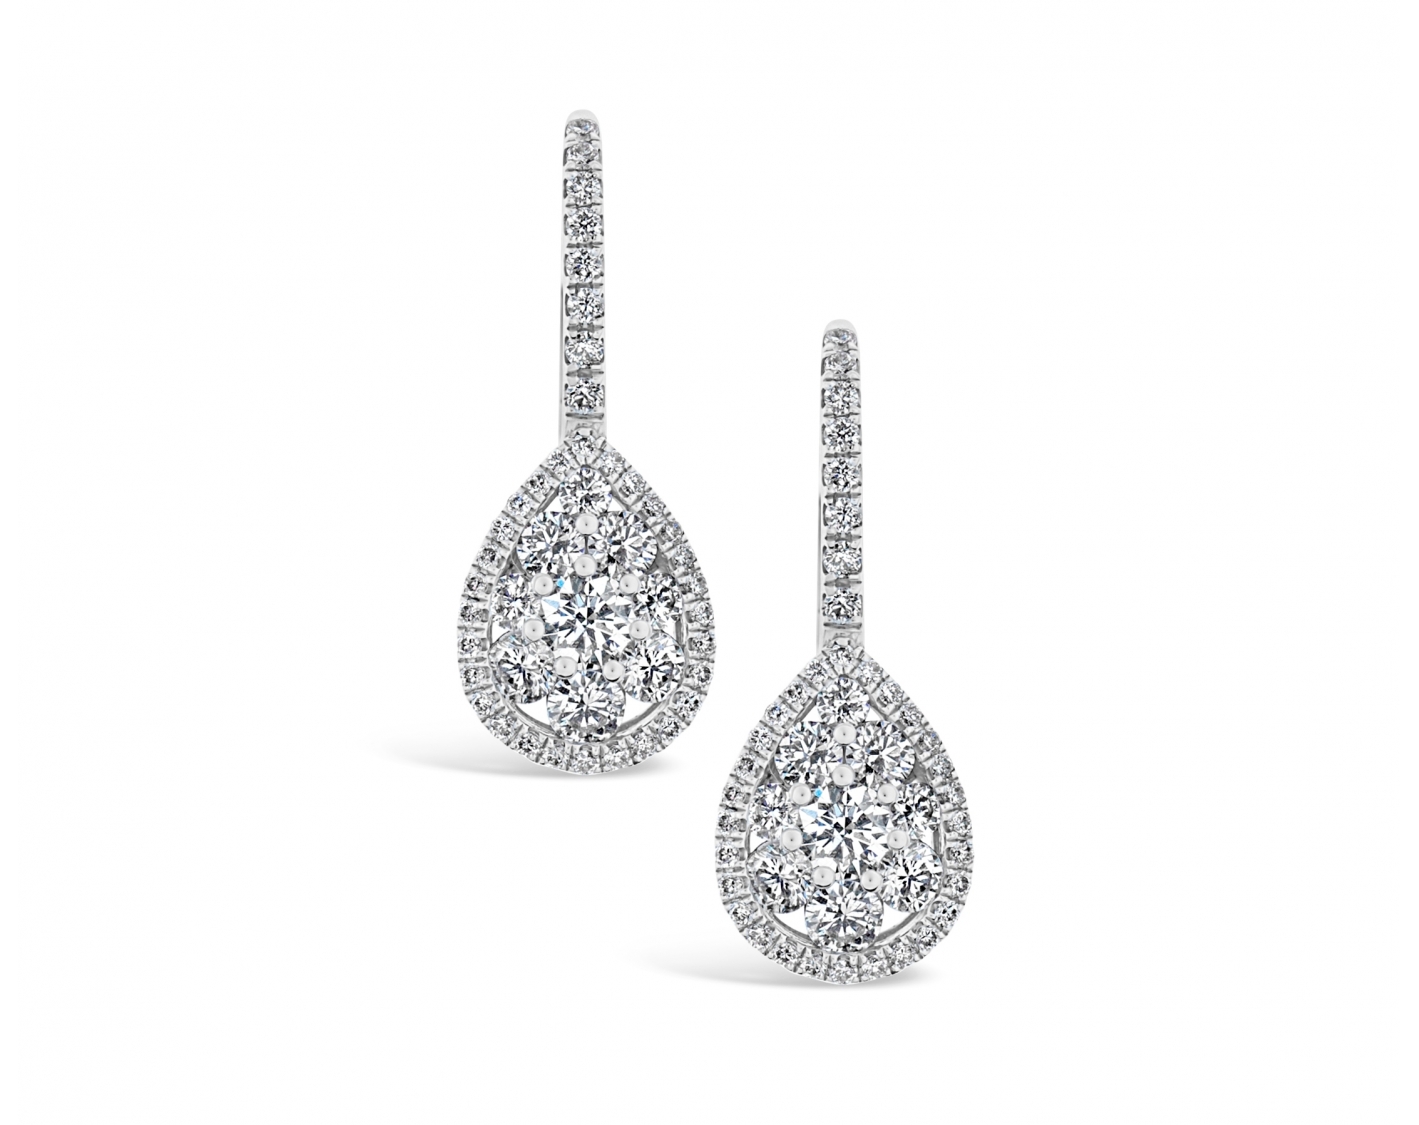 18k yellow gold pear shaped illusion set diamond earrings with round upstones Photos & images